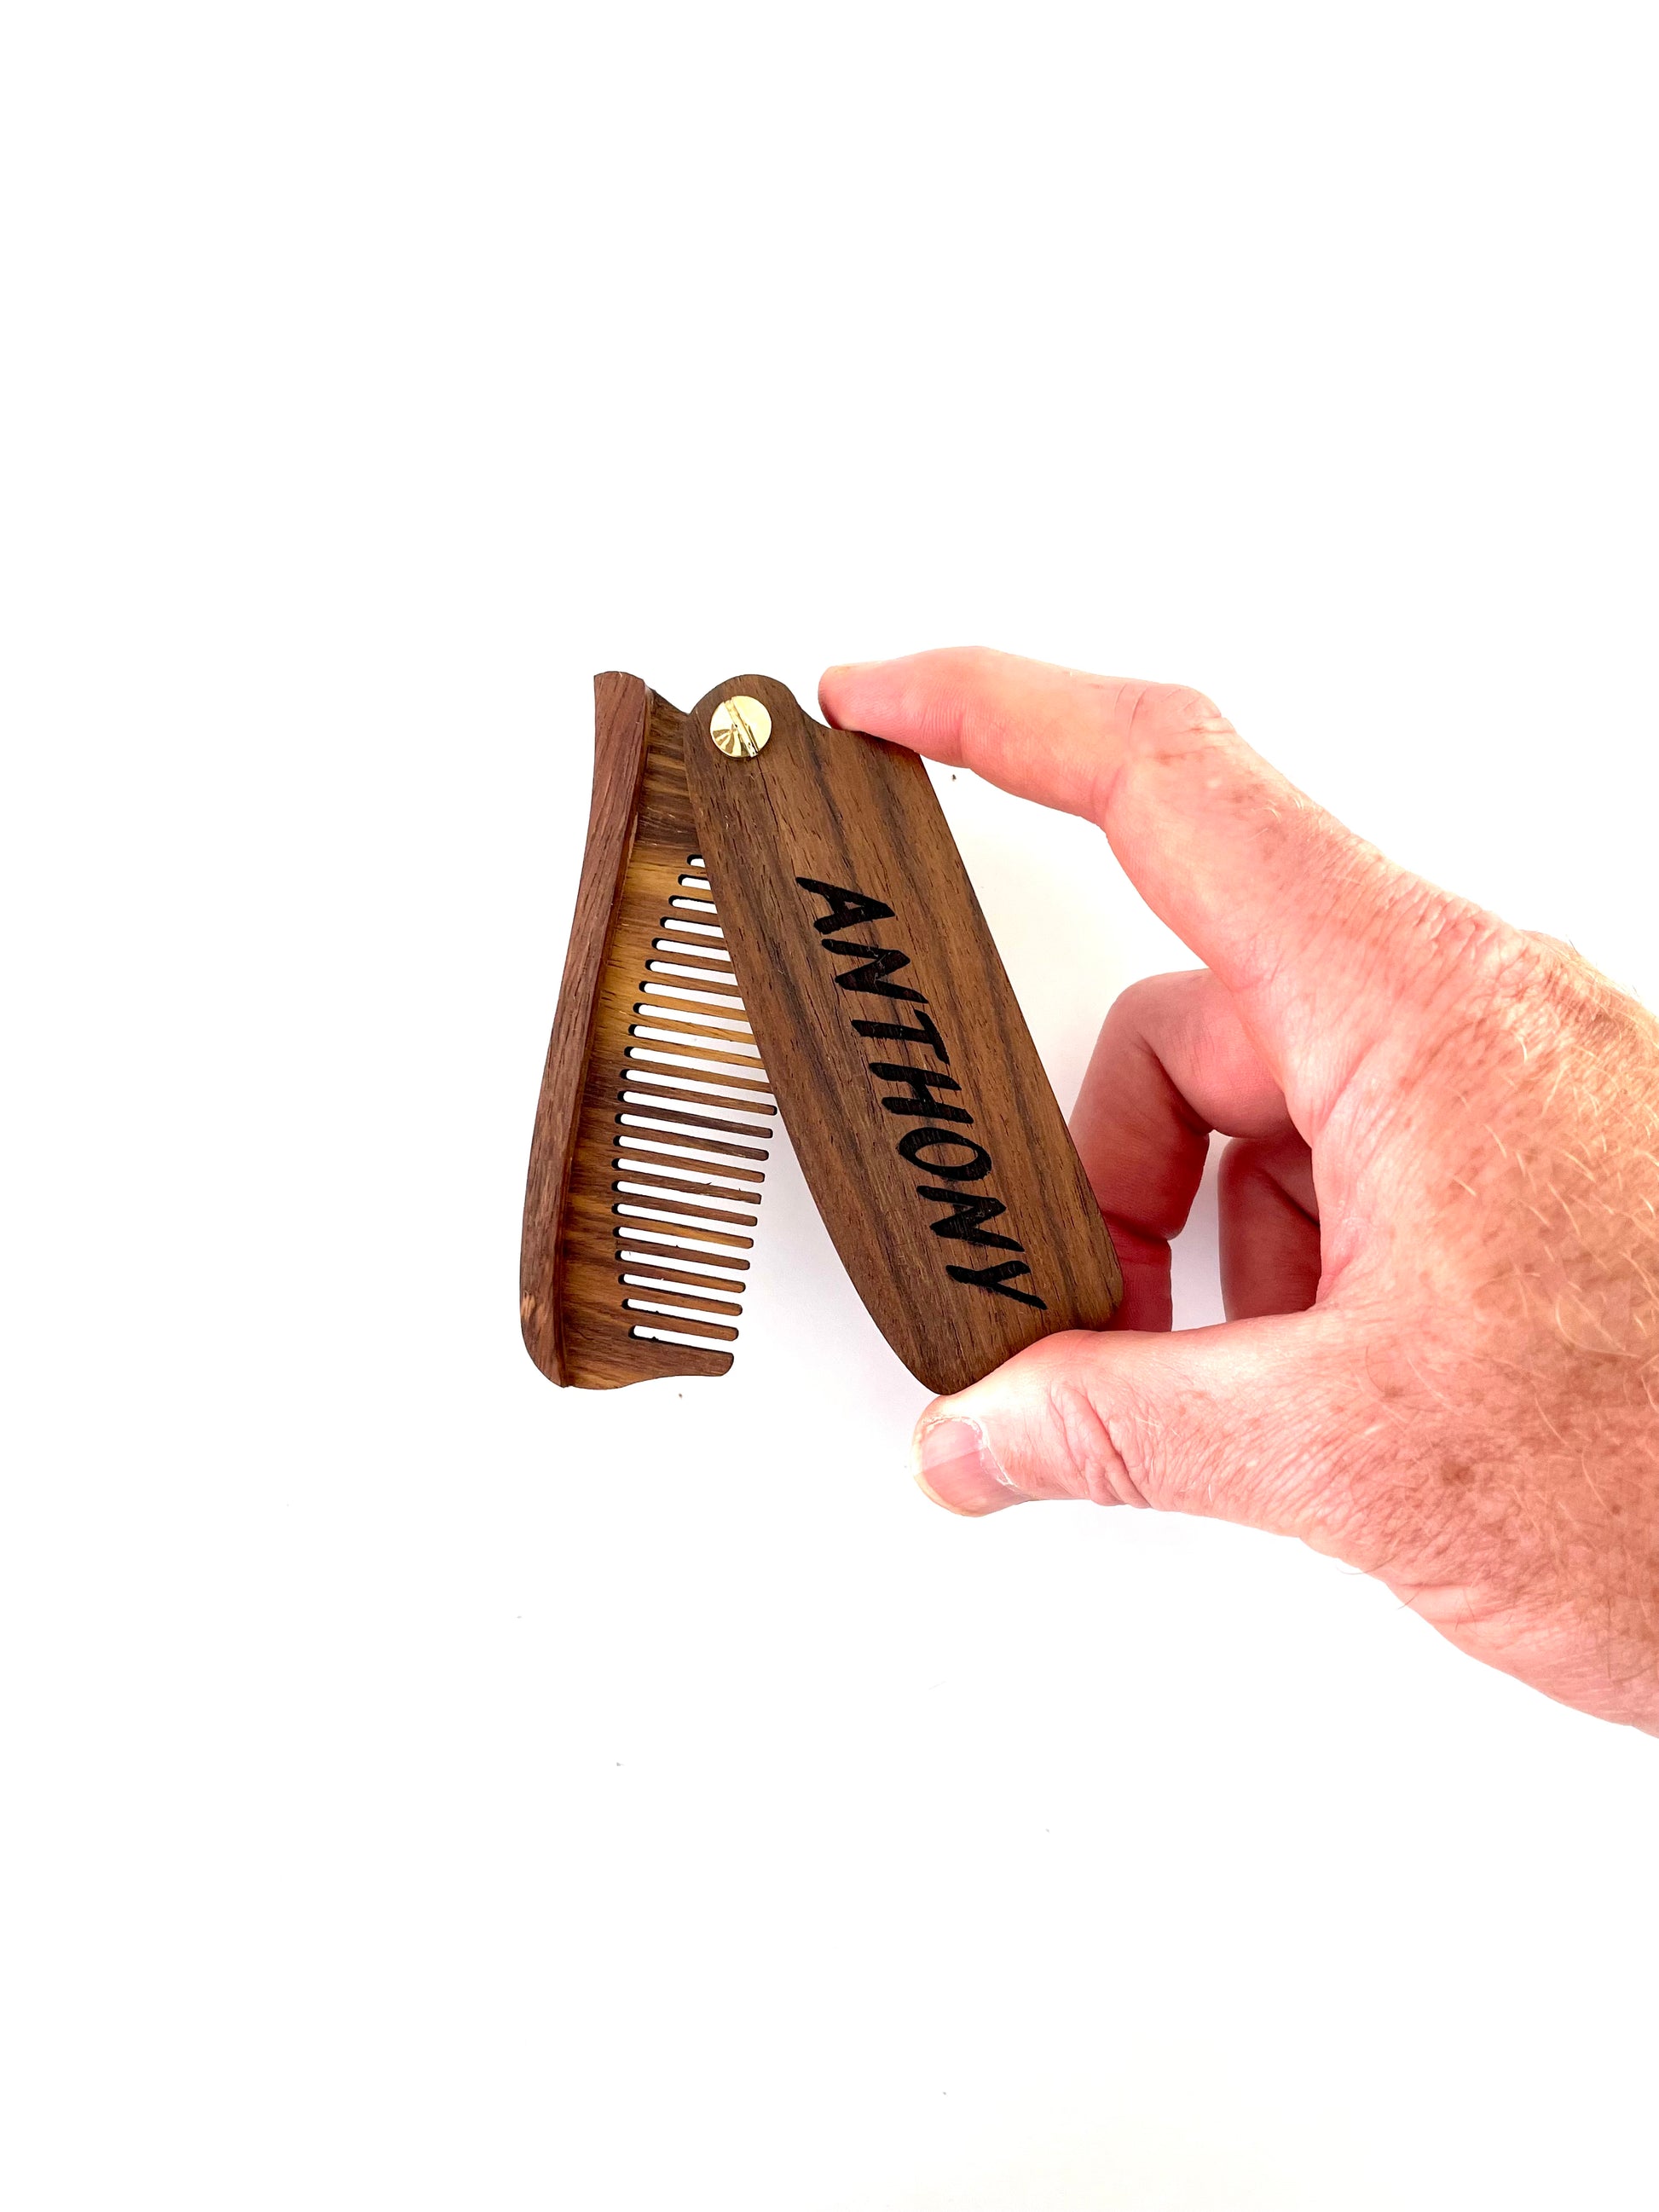 Made from eco friendly lightweight wood, your engraved wood beard comb makes for a unique gift for him.  Your personalized wood beard comb can be single or double sided engraved with letters, numbers or symbols.